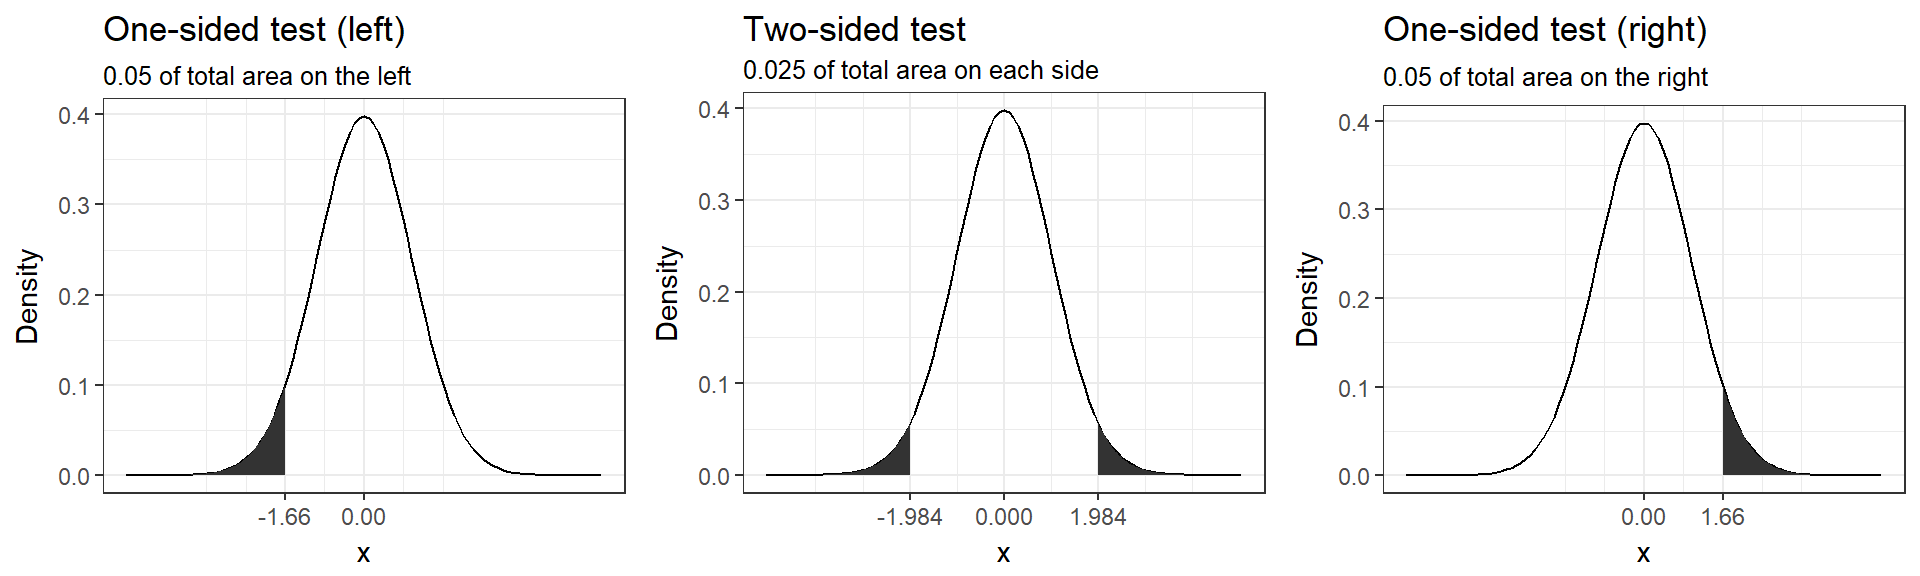 One-sided versus two-sided test (df=100, alpha=0.05)